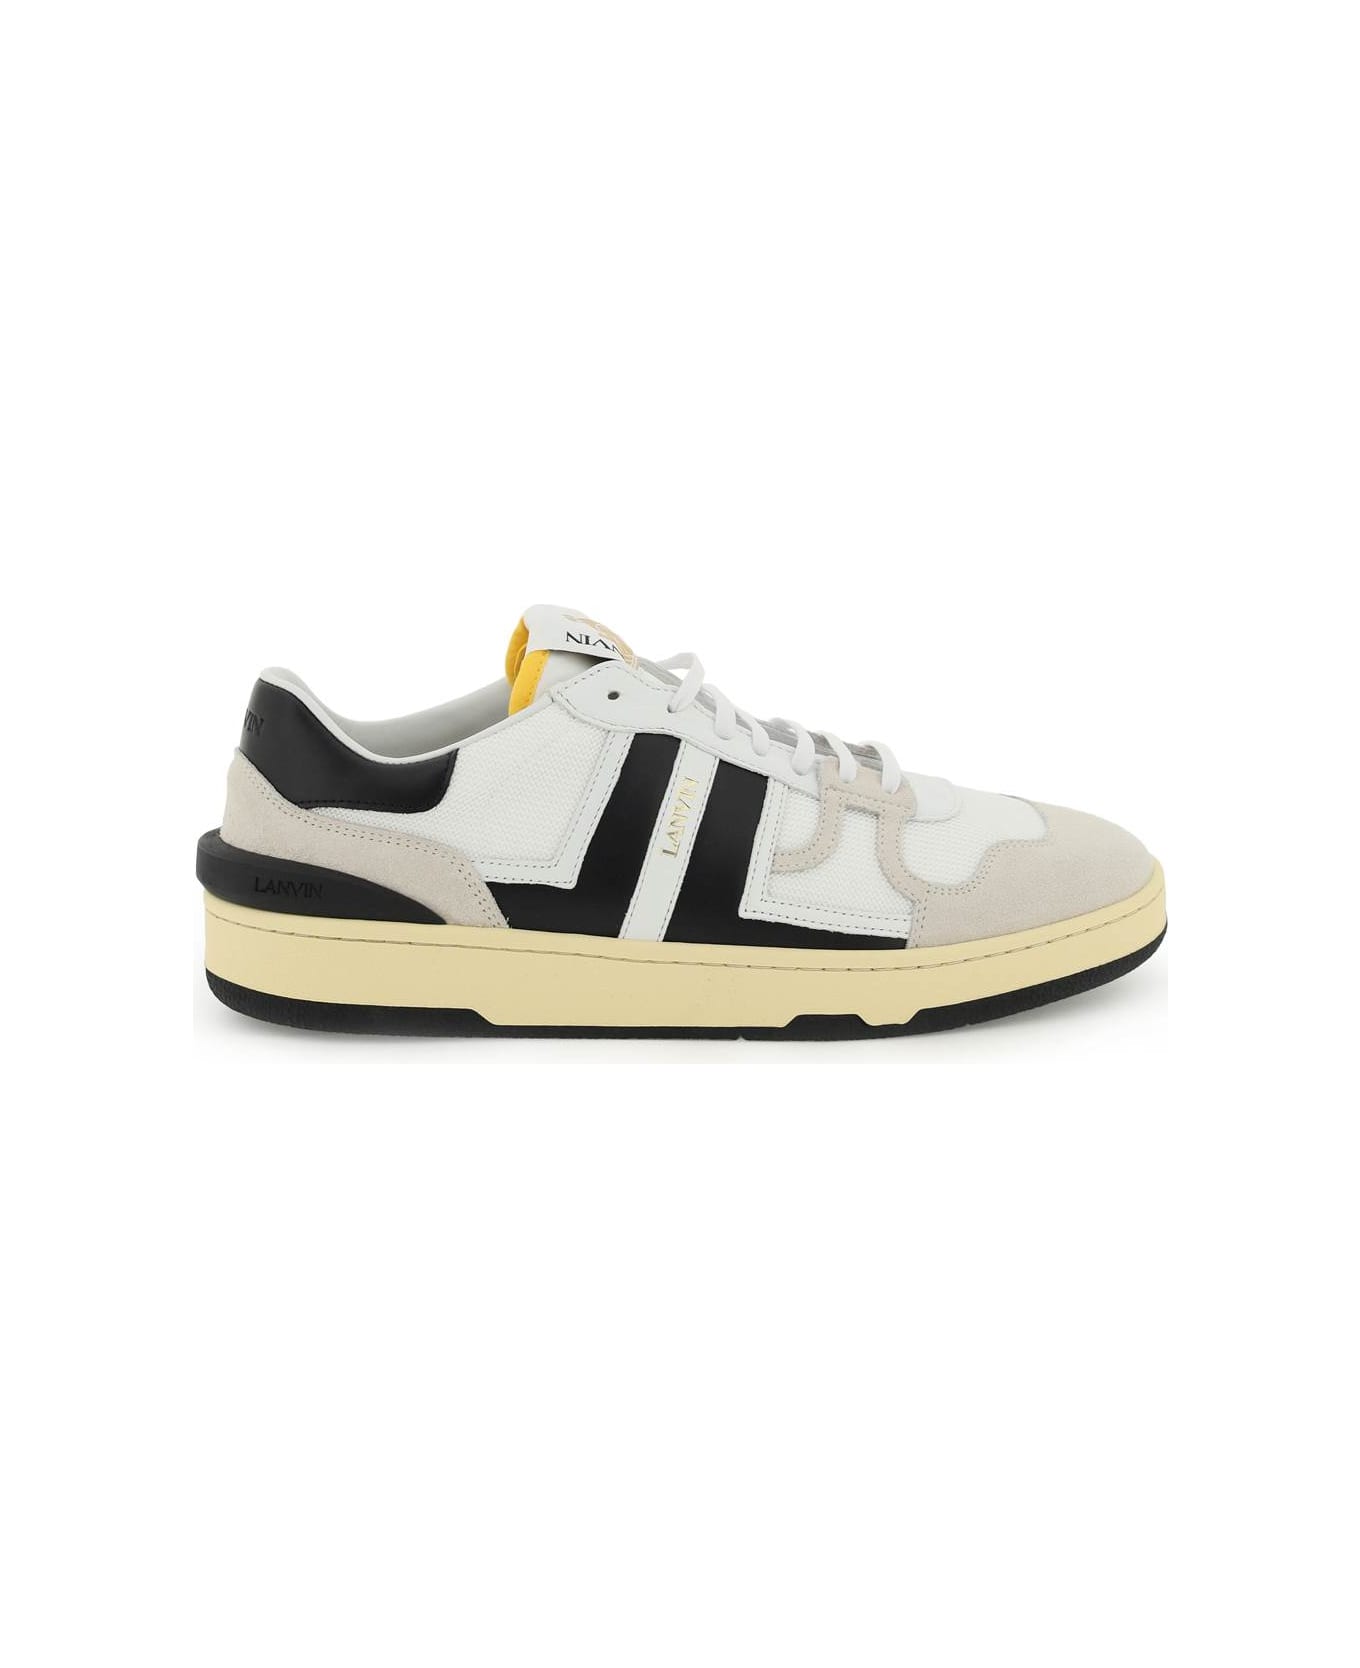 Lanvin 'clay' Sneakers - WHITE